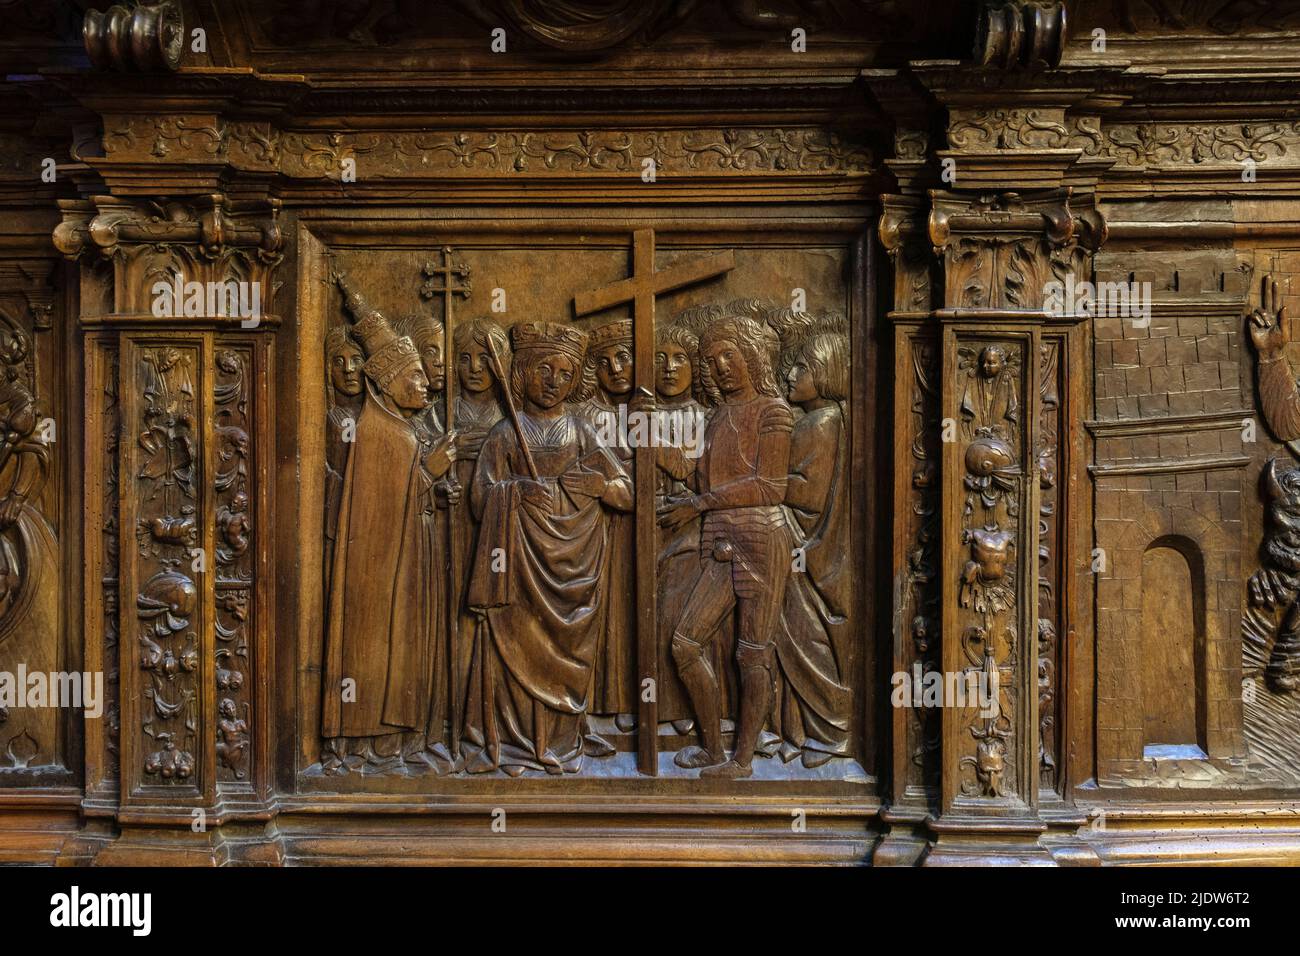 Spain, Burgos. Cathedral of Santa Maria, a World Heritage Site. Carvings on the Choir Stalls. Stock Photo